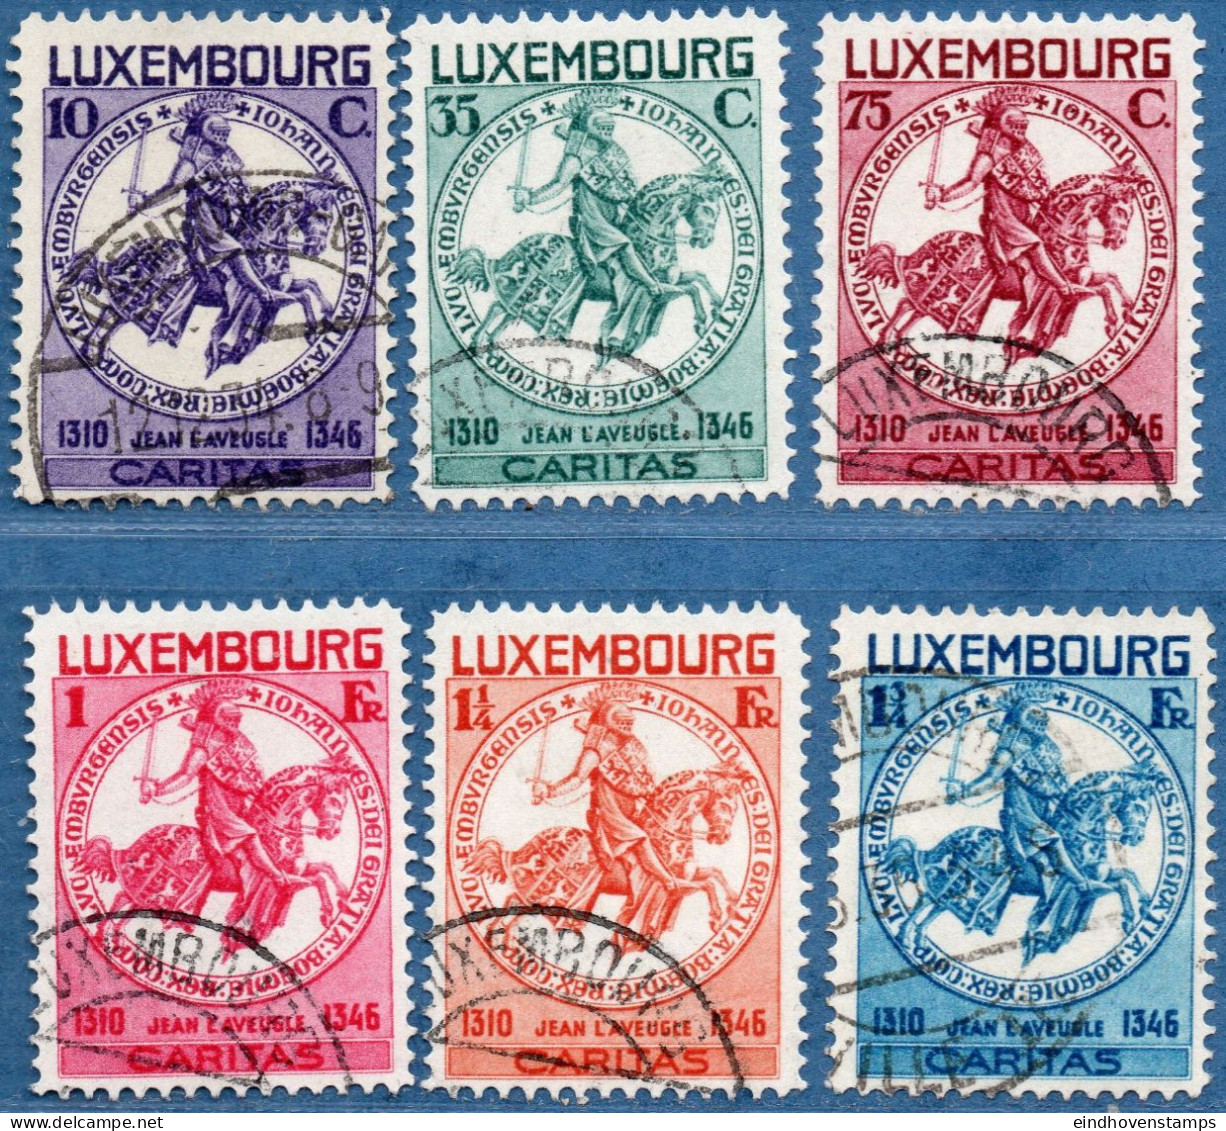 Luxemburg 1934 Caritas Stamps Seal Of Count John The Blind Of Luxemburg 6 Values Cancelled - Used Stamps